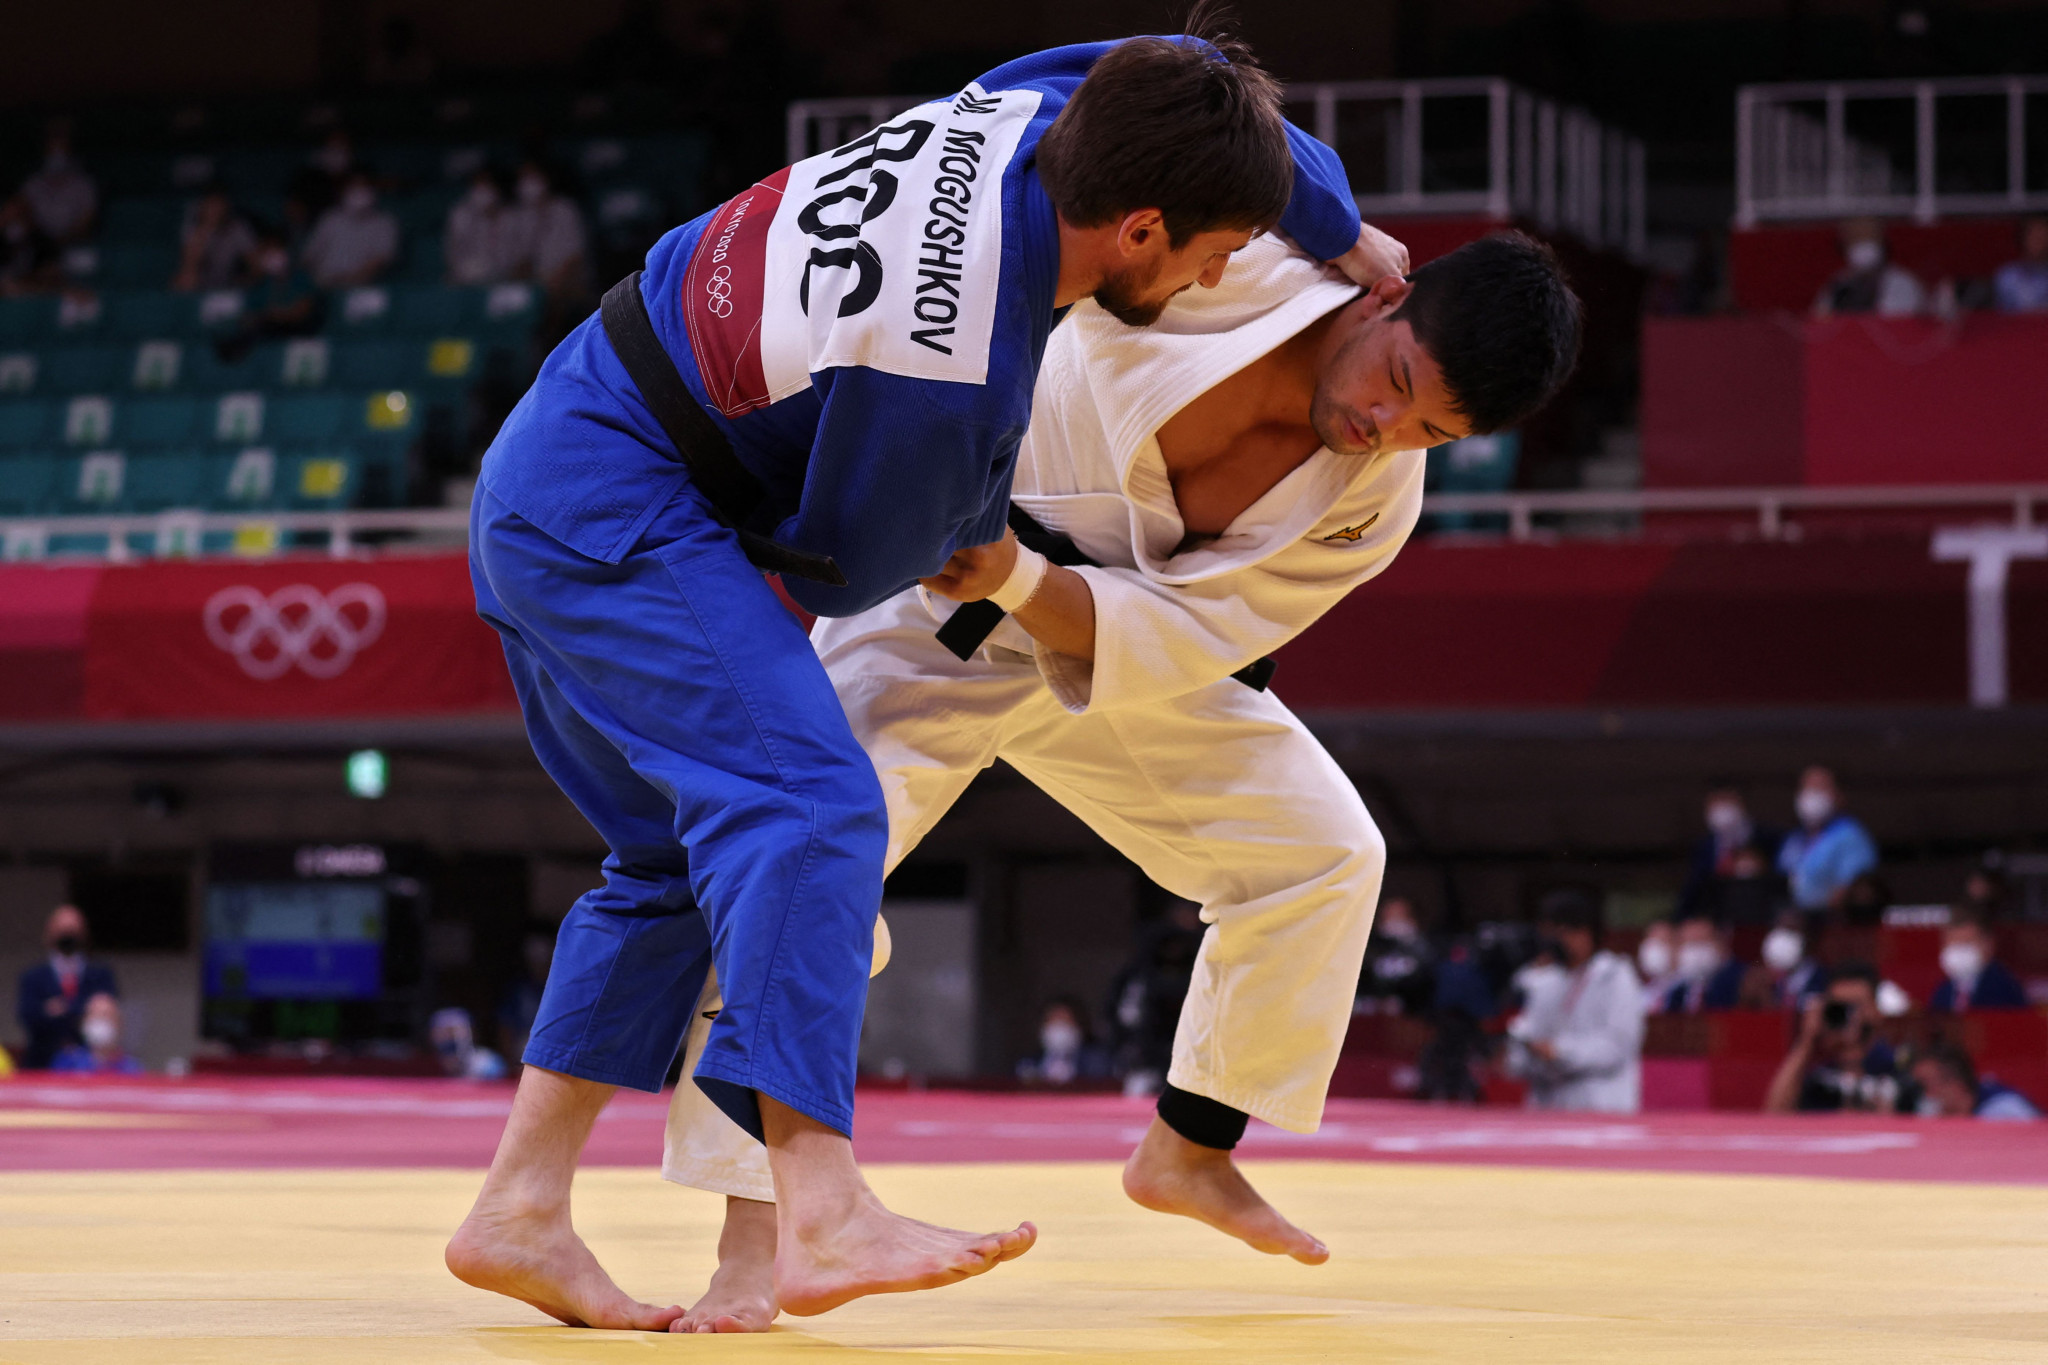 The IJF's ban on Russian and Belarusian judoka from its events has lifted ©Getty Images